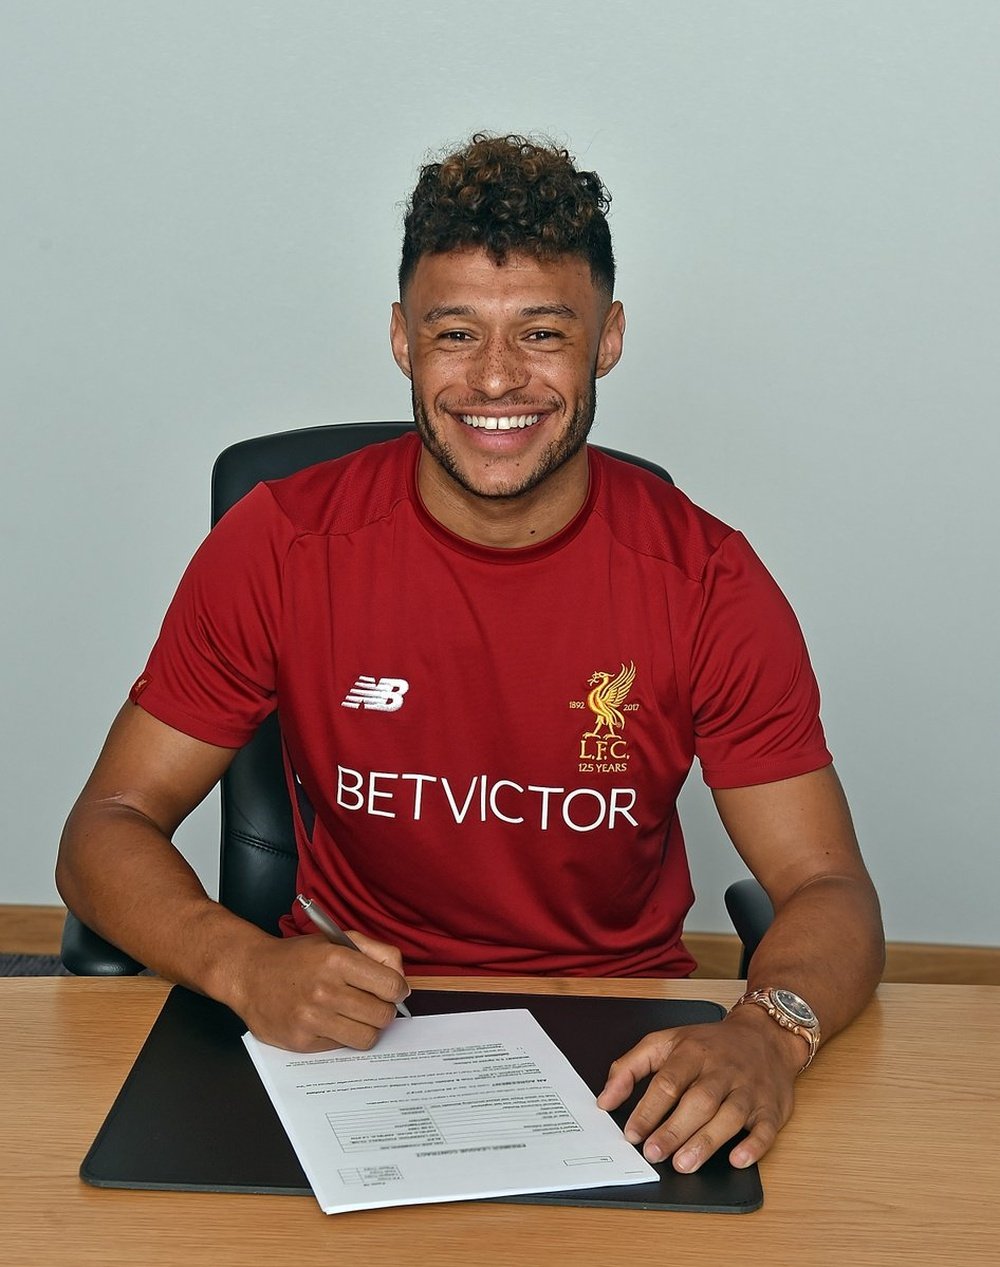 Oxlade-Chamberlain signed for Liverpool after turning down Chelsea. LiverpoolFC